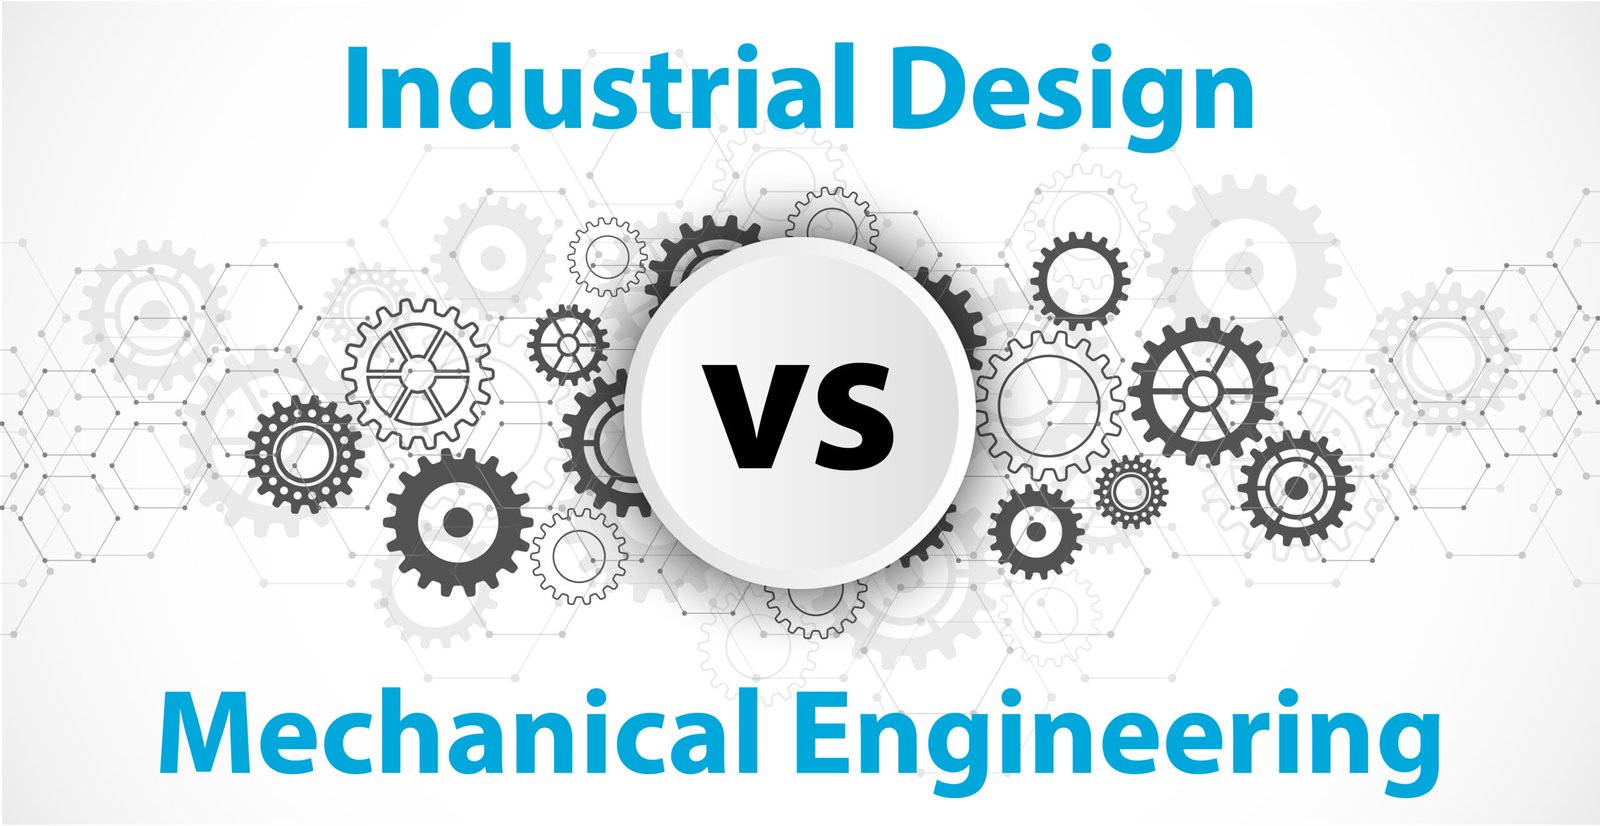 What is industrial design